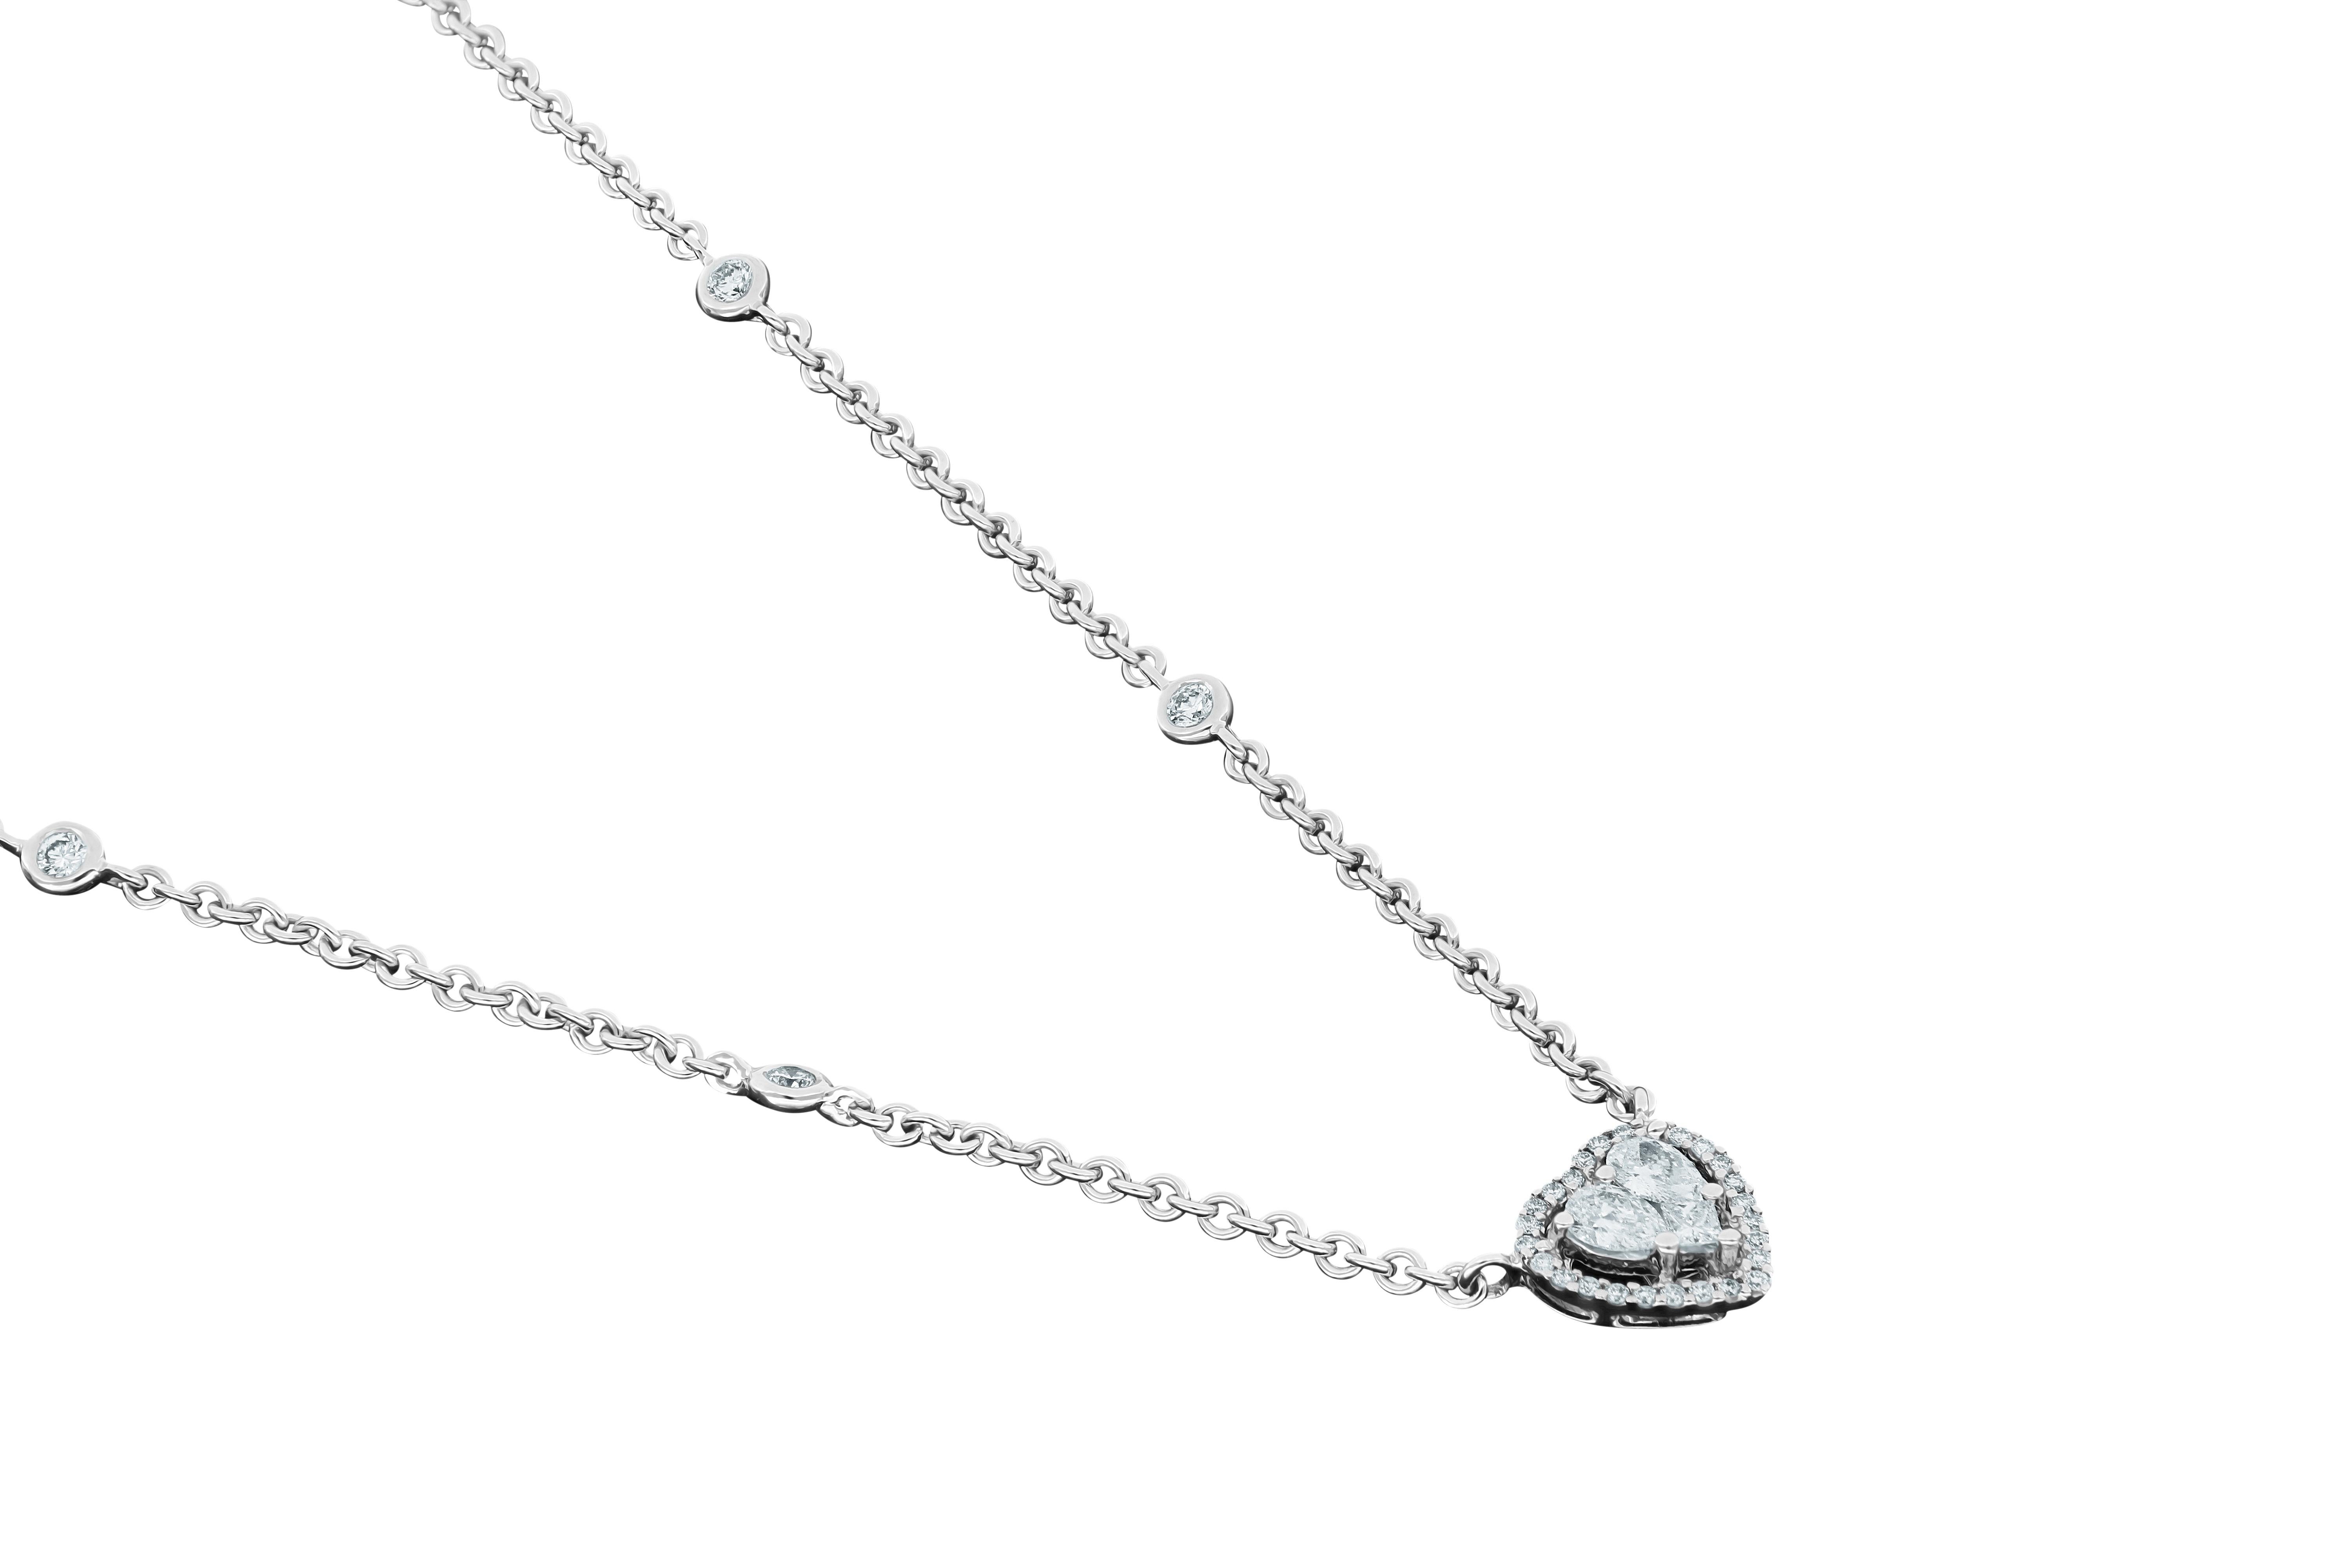 Unique, classy White Gold 18K Pendant by Amwaj Jewelry. Bring a touch of romance to your day to day style with this gorgeous Pendant made of two pear shape Diamonds and one princess cut Diamond framed with a beautiful round shape Diamond halo.